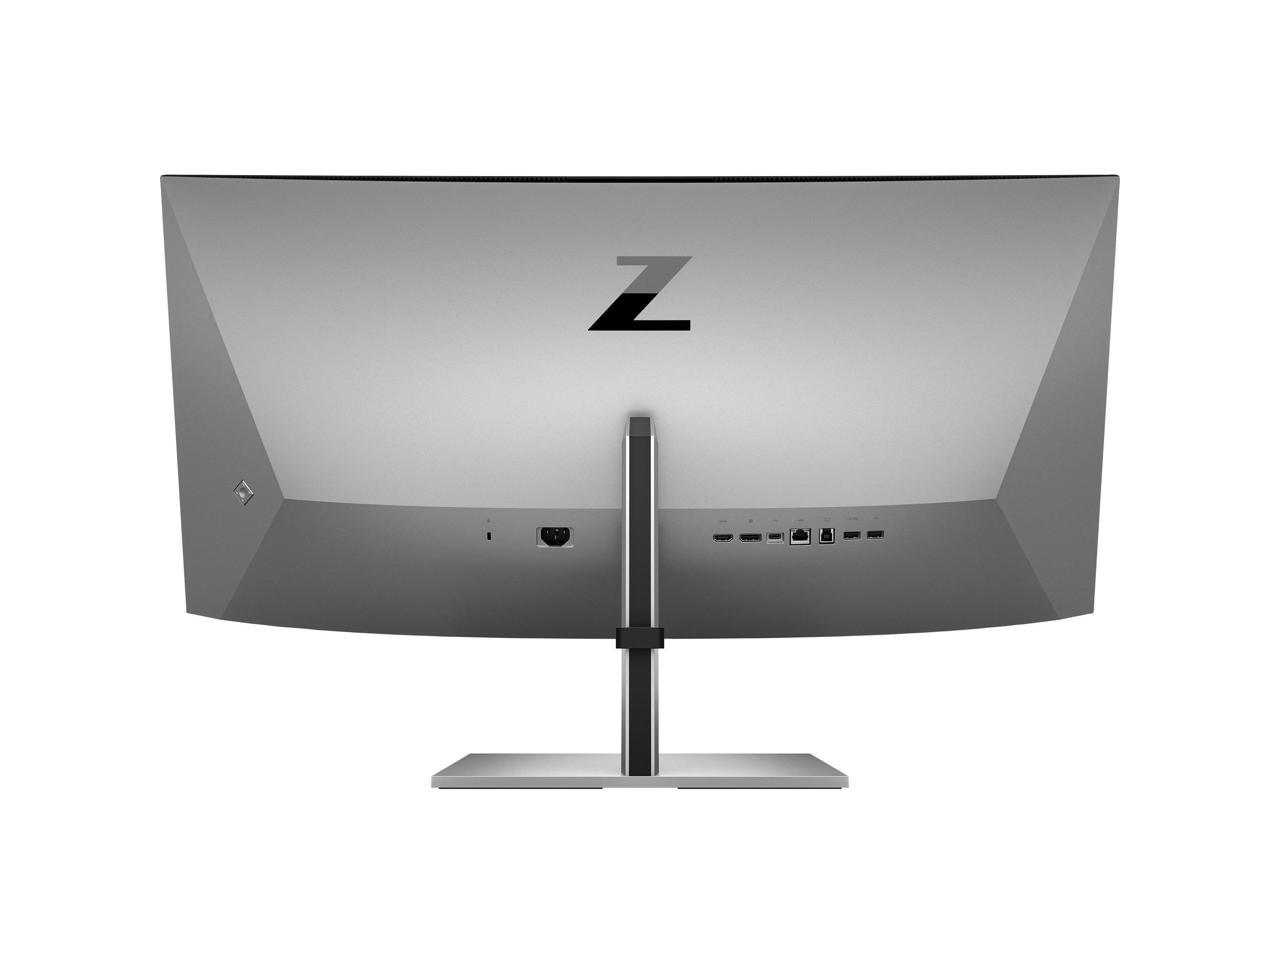 HP Z34c G3 30A19AA#ABA 34" WQHD 3440 x 1440 (2K) 60 Hz HDMI, DisplayPort, USB, RJ-45 Curved IPS Monitor - image 5 of 5